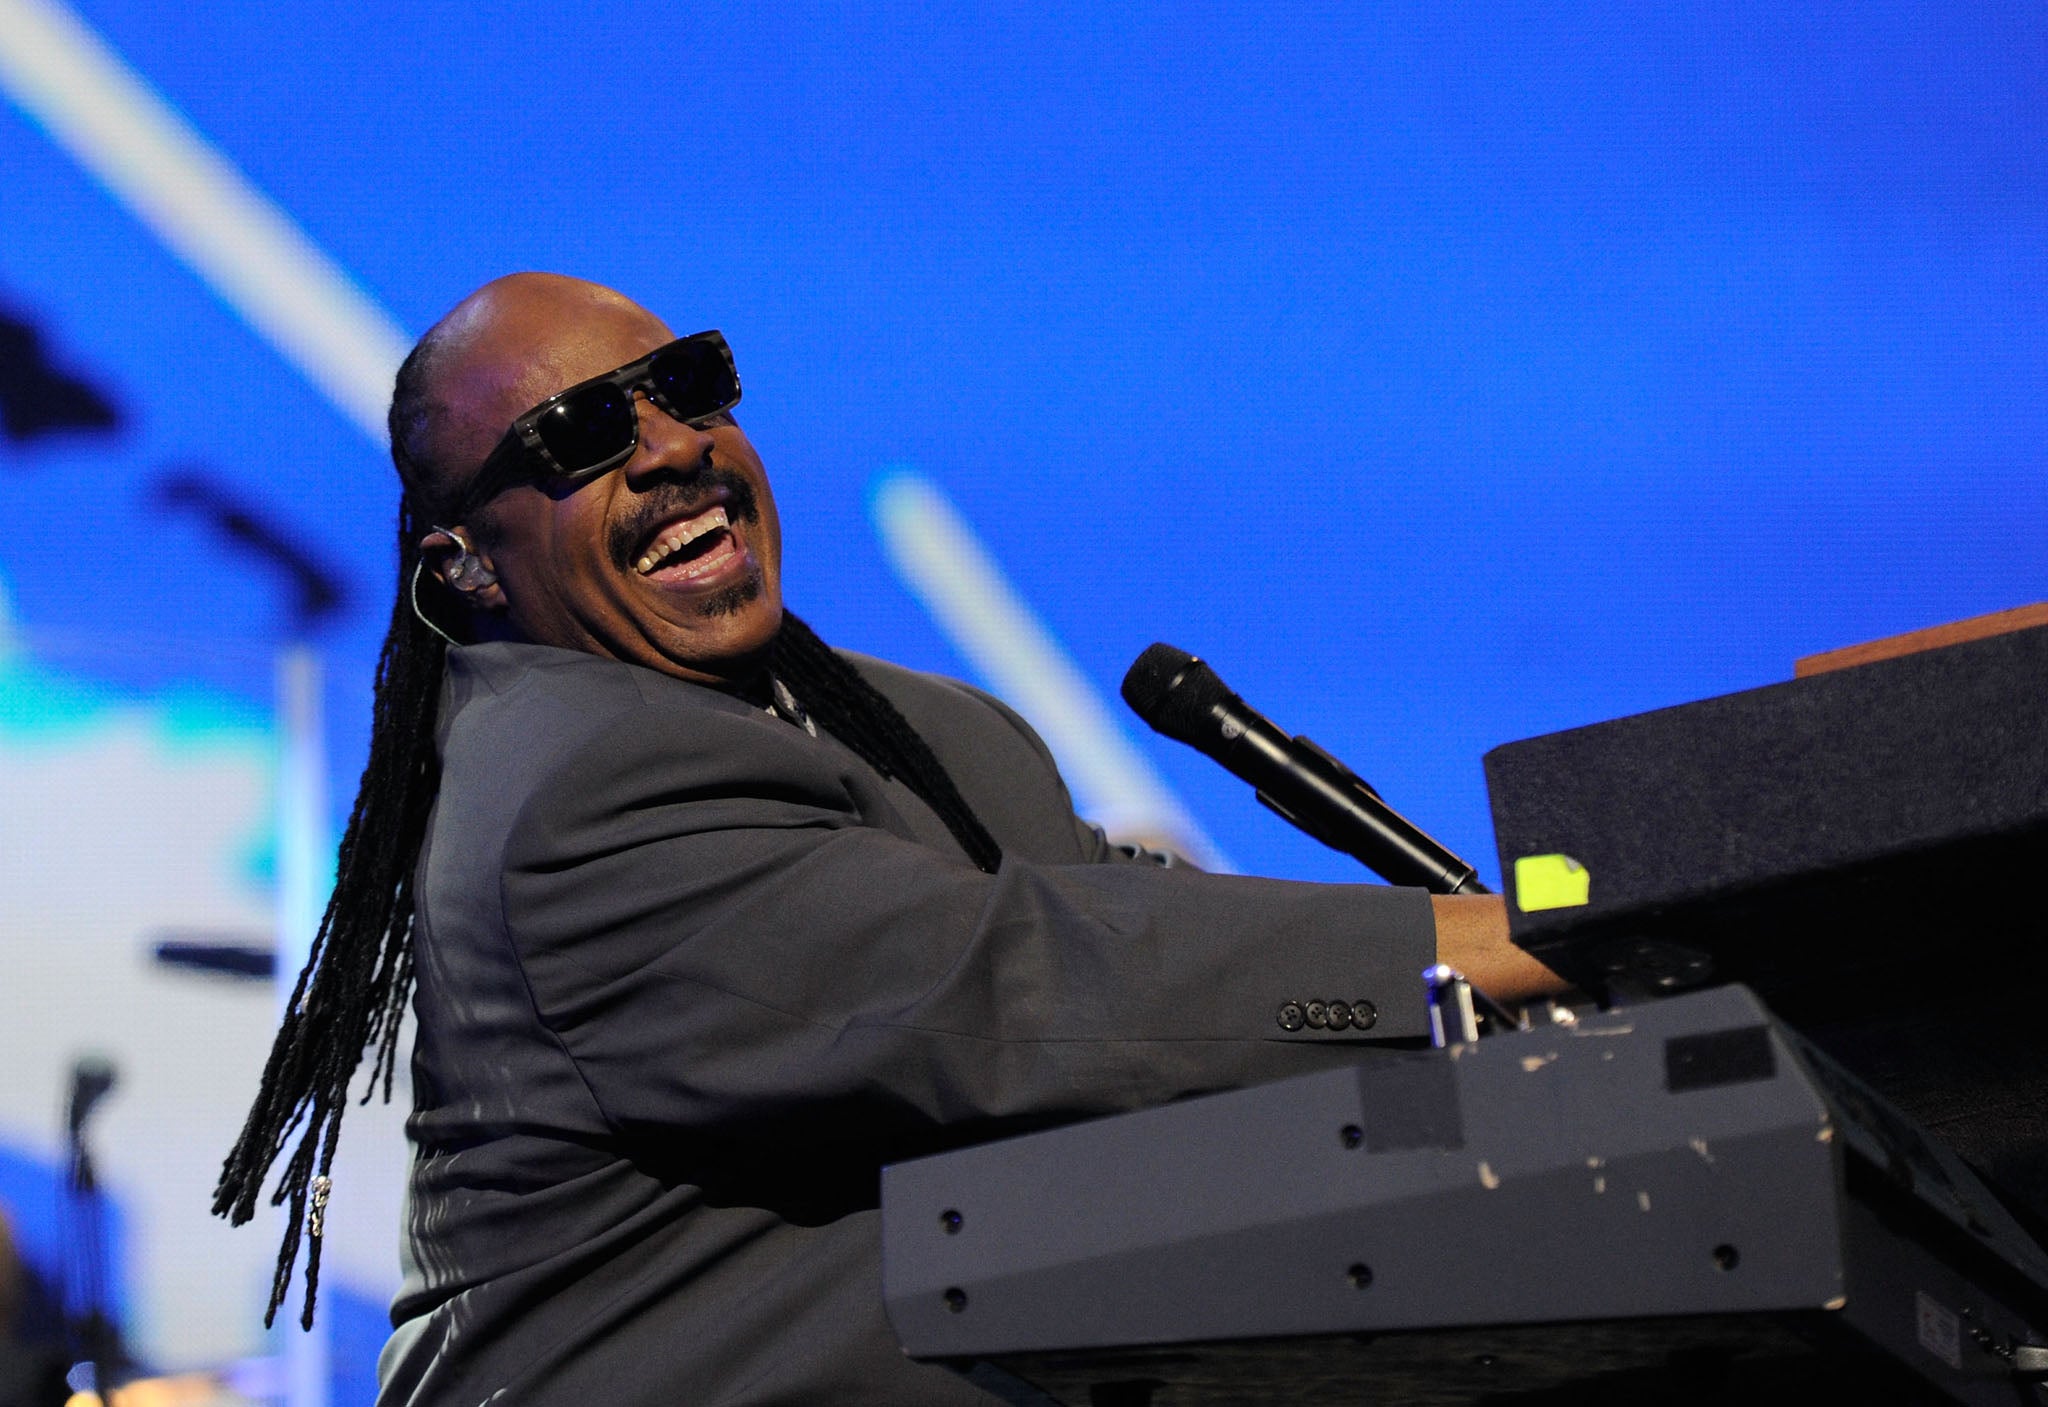 Stevie Wonder has confirmed he will be releasing two more albums after an eight year hiatus